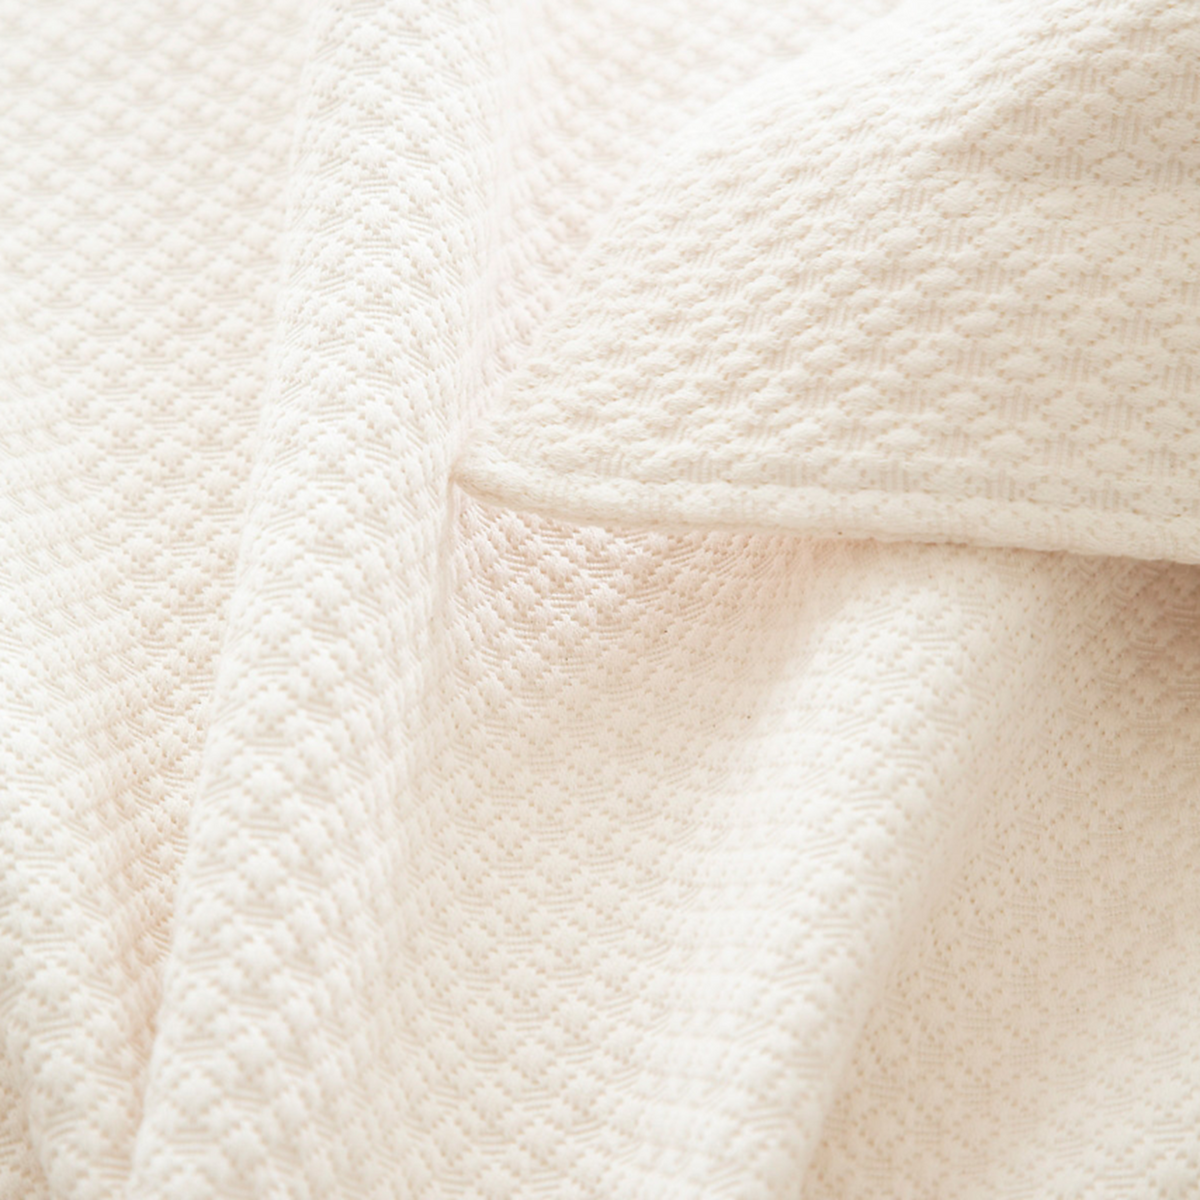 Close Up Image of Pine Cone Hill Petite Trellis Matelassé Coverlet and Shams in Ivory Color